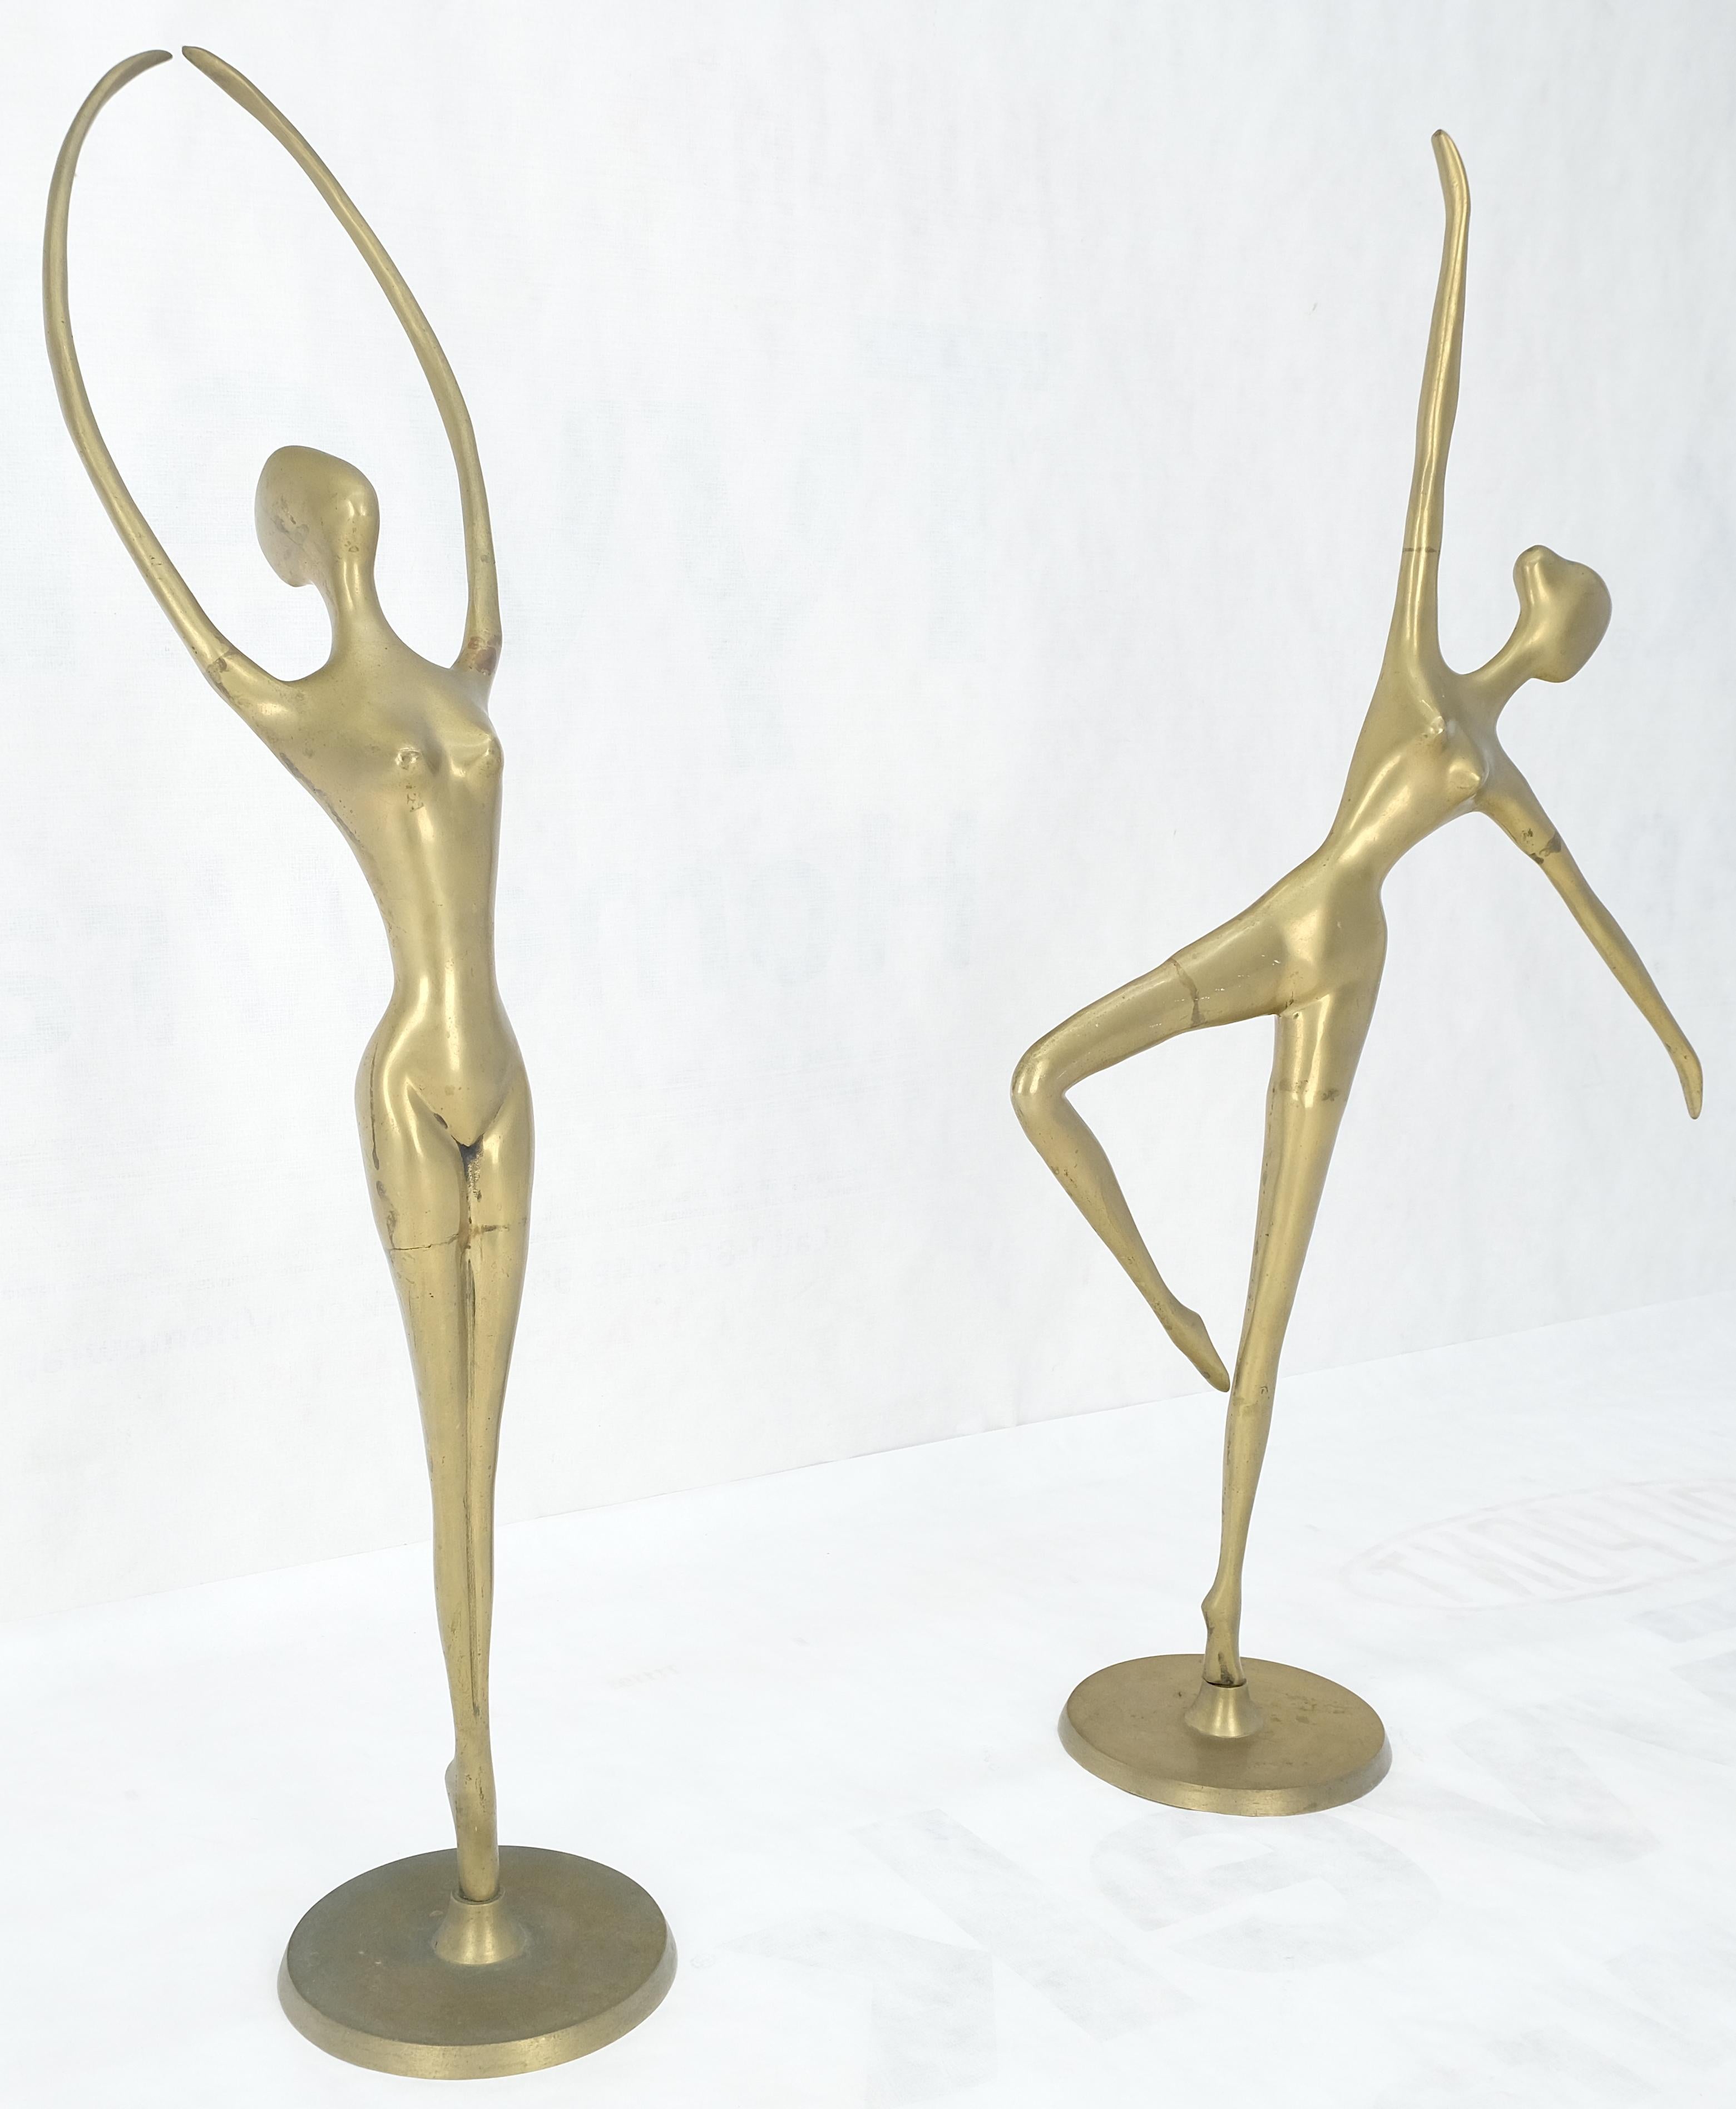 Pair of 3 Foot Tall Solid Brass Ballerina Dancers Sculptures Figurines Statue  For Sale 1